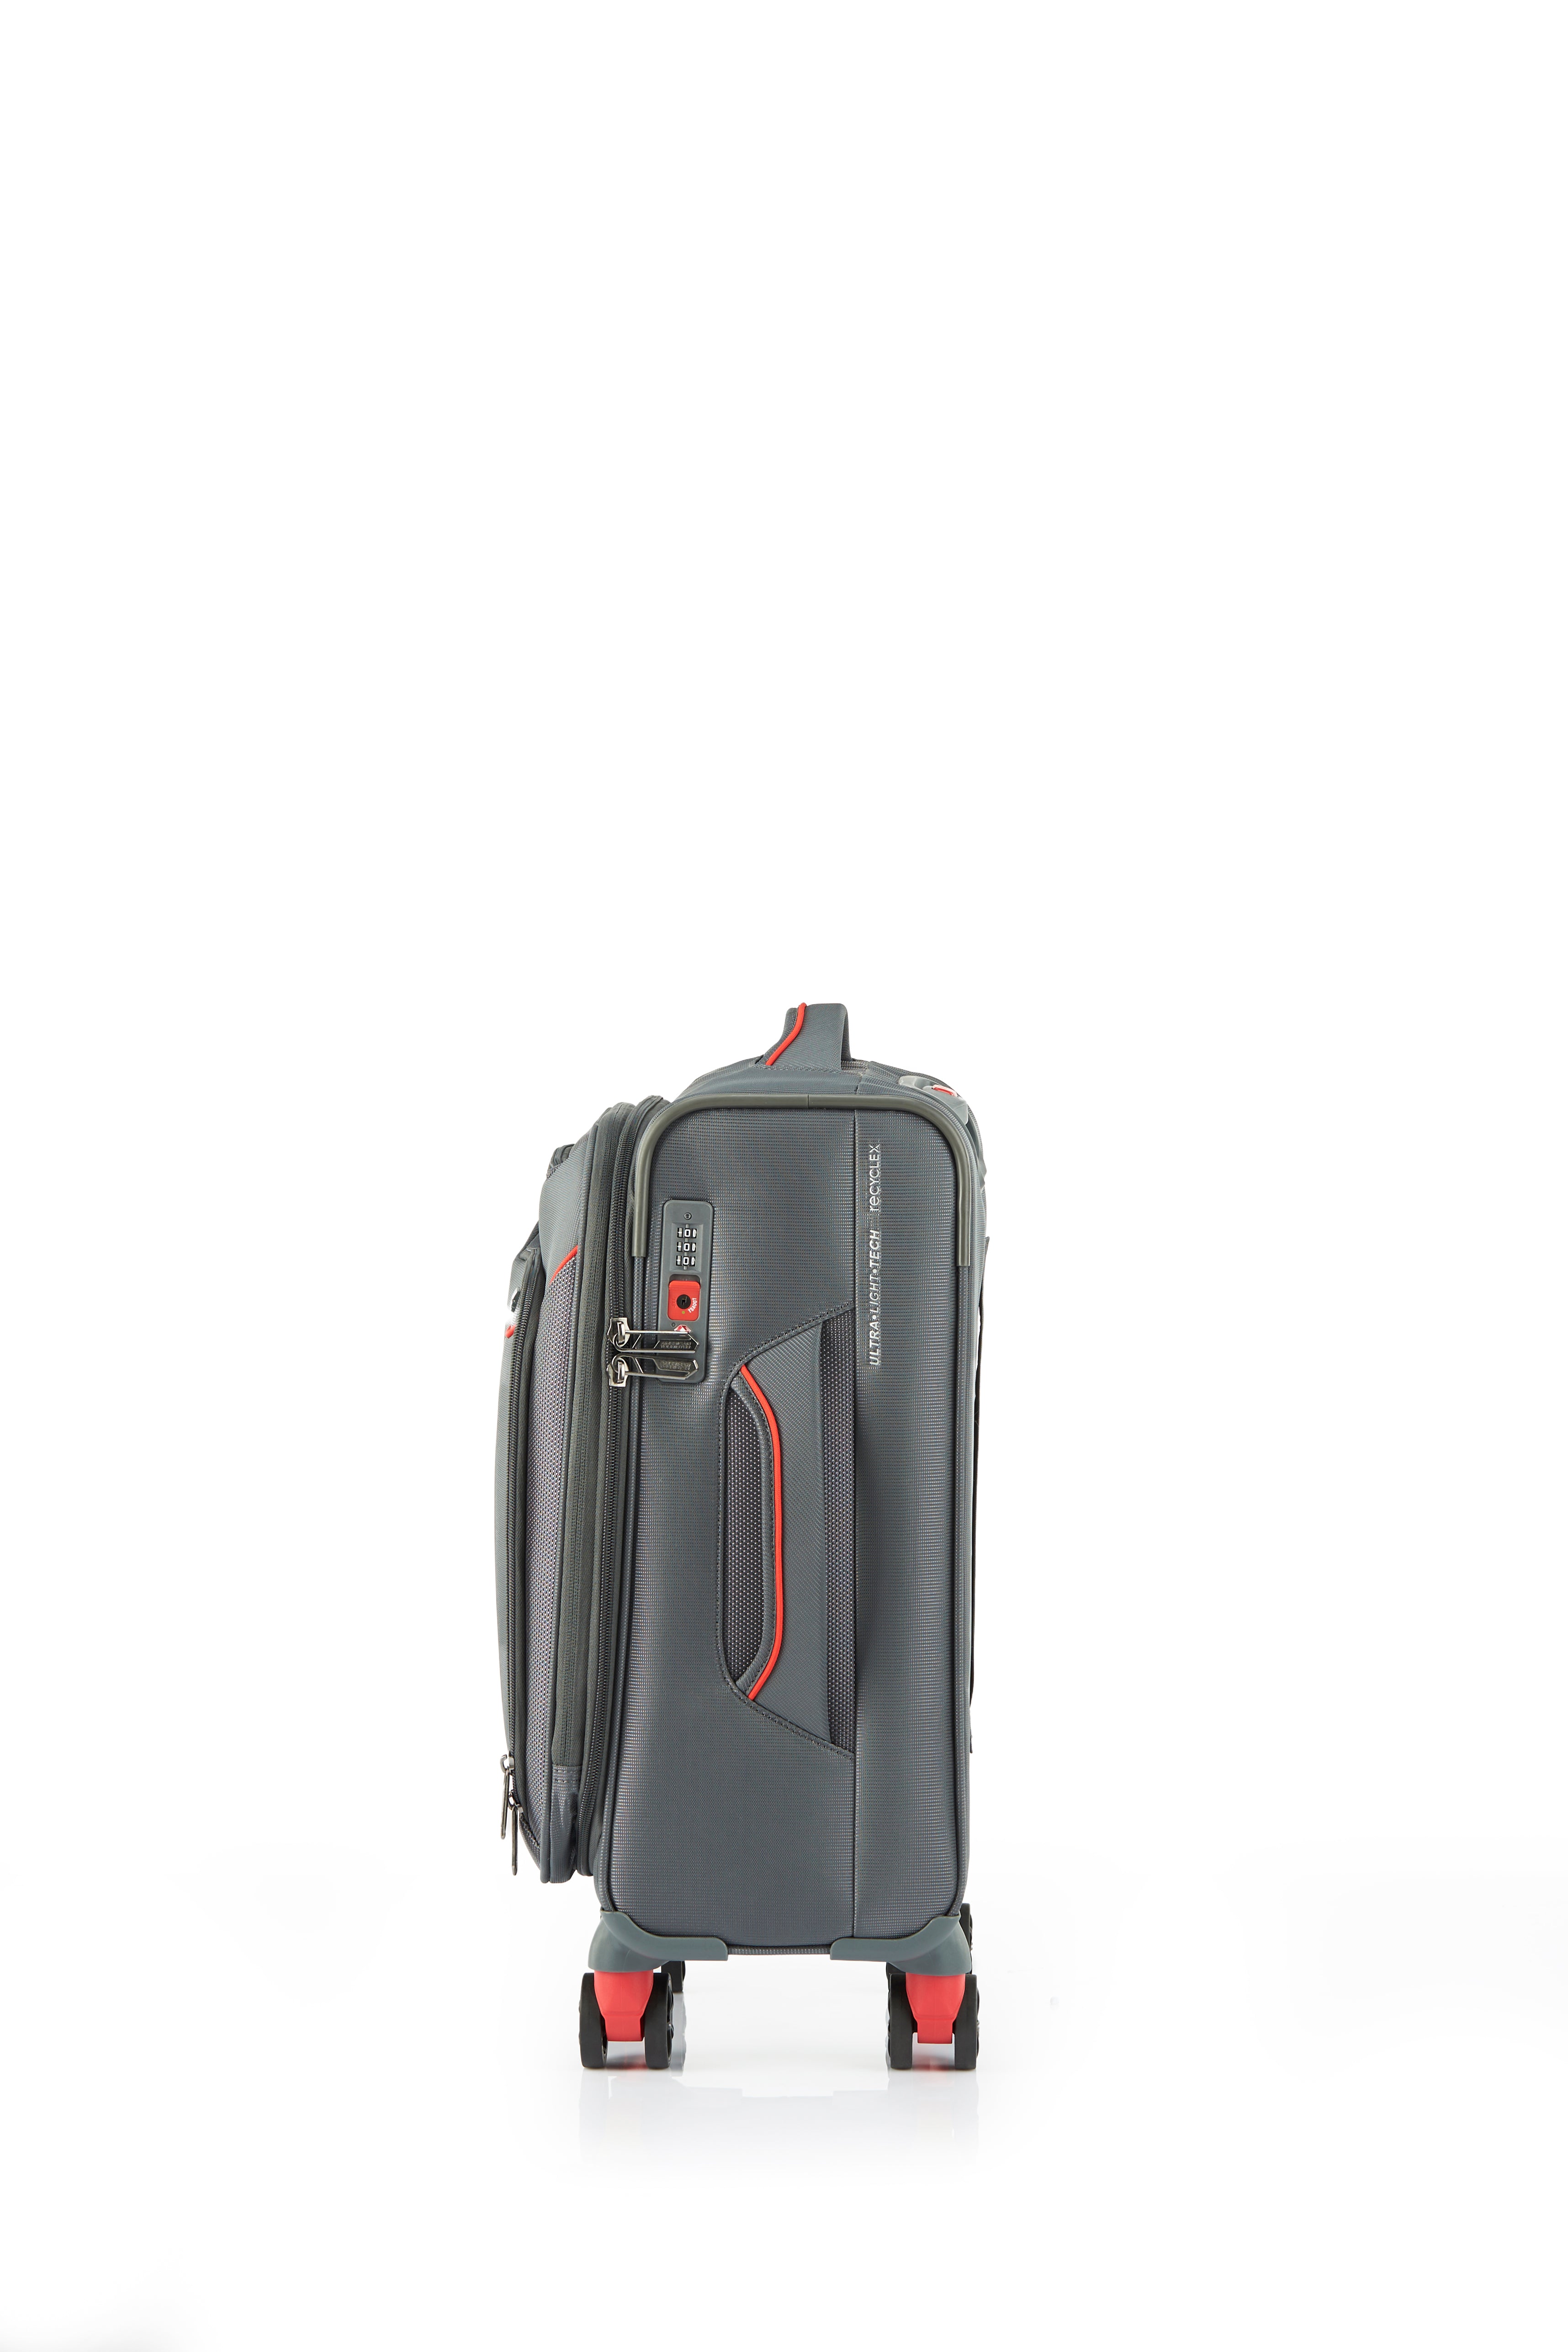 American Tourister - Applite ECO 55cm Small Suitcase - Grey/Red-4